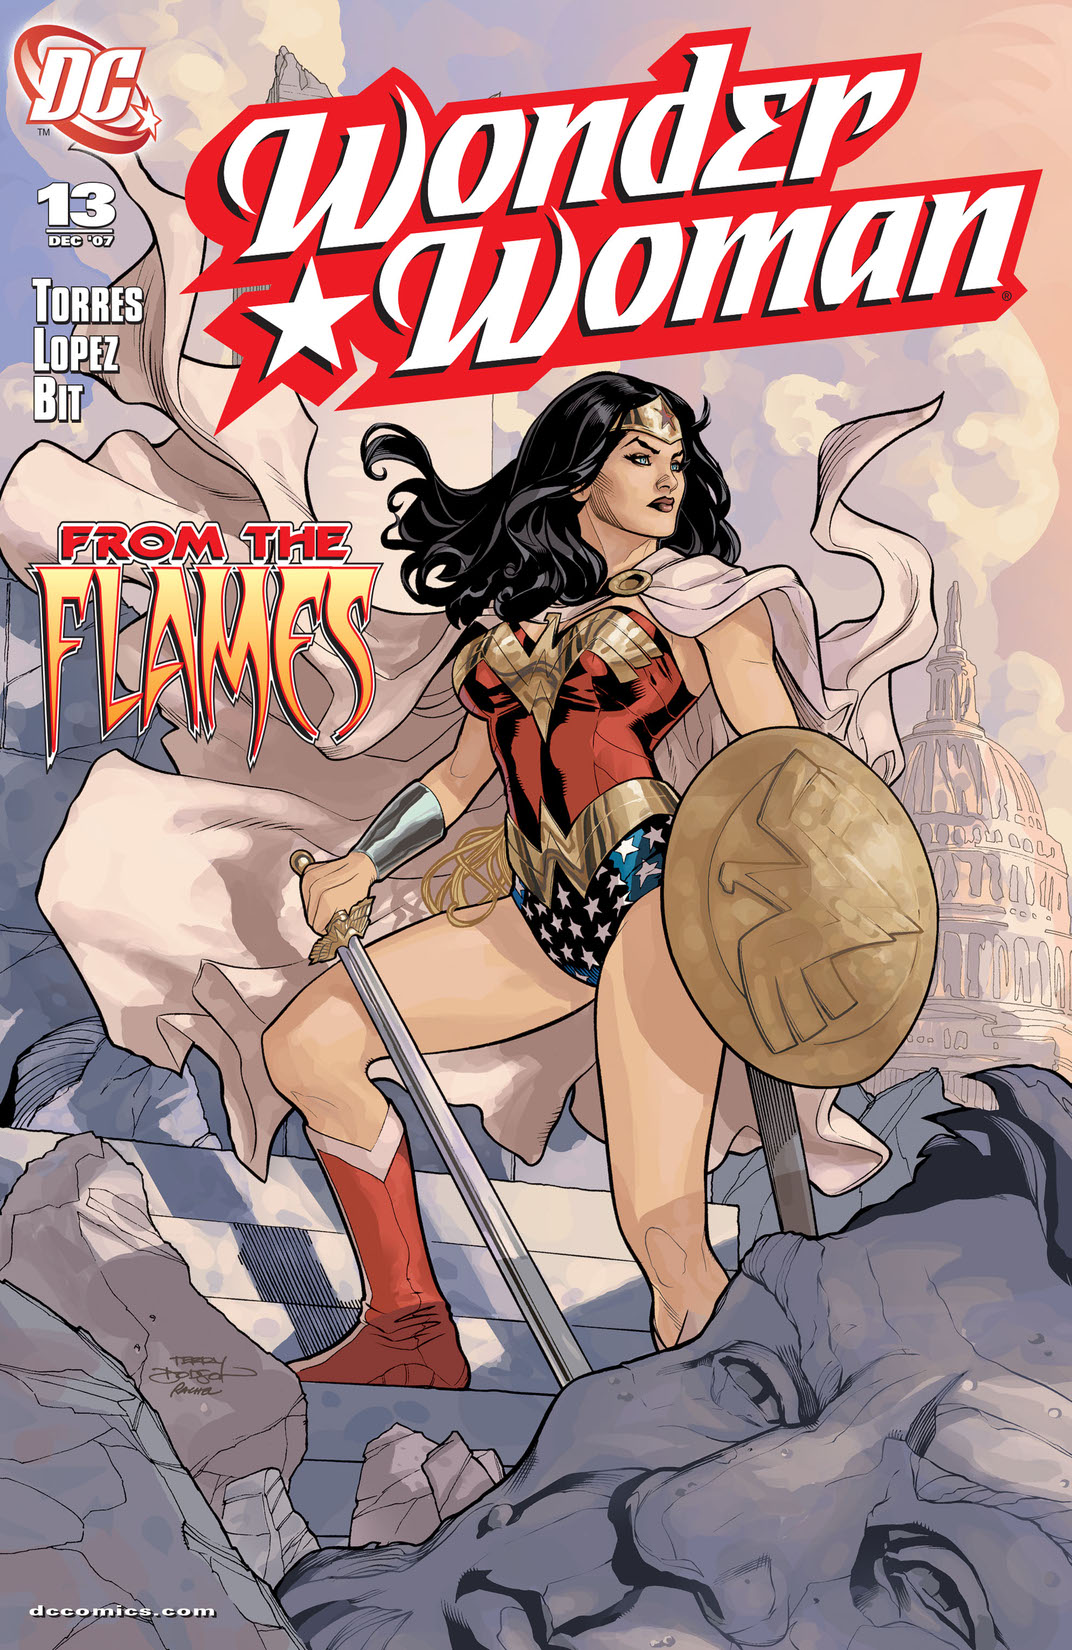 Wonder Woman (2006-) #13 preview images